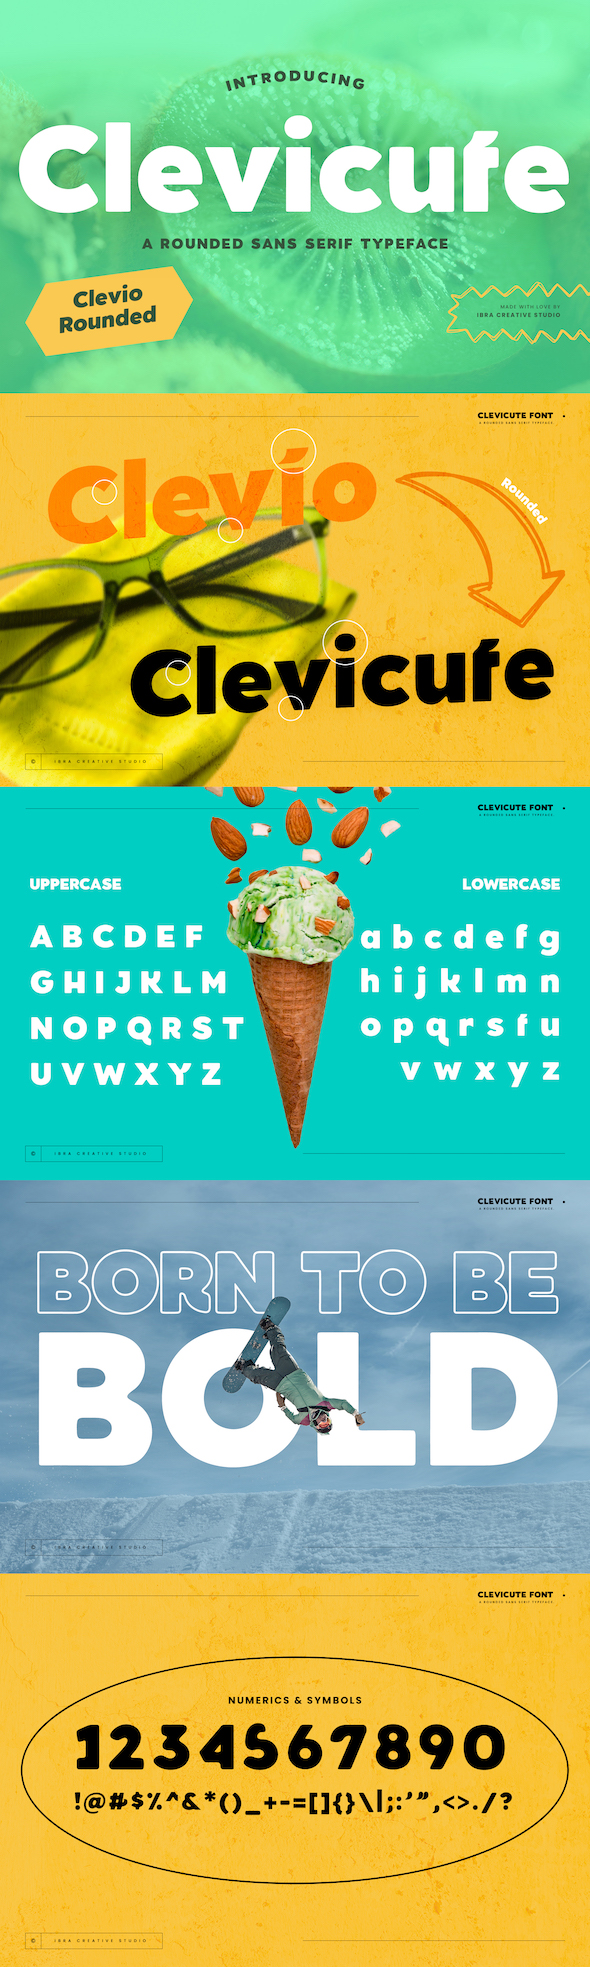 Clevicute - A Rounded Sans Serif Typeface